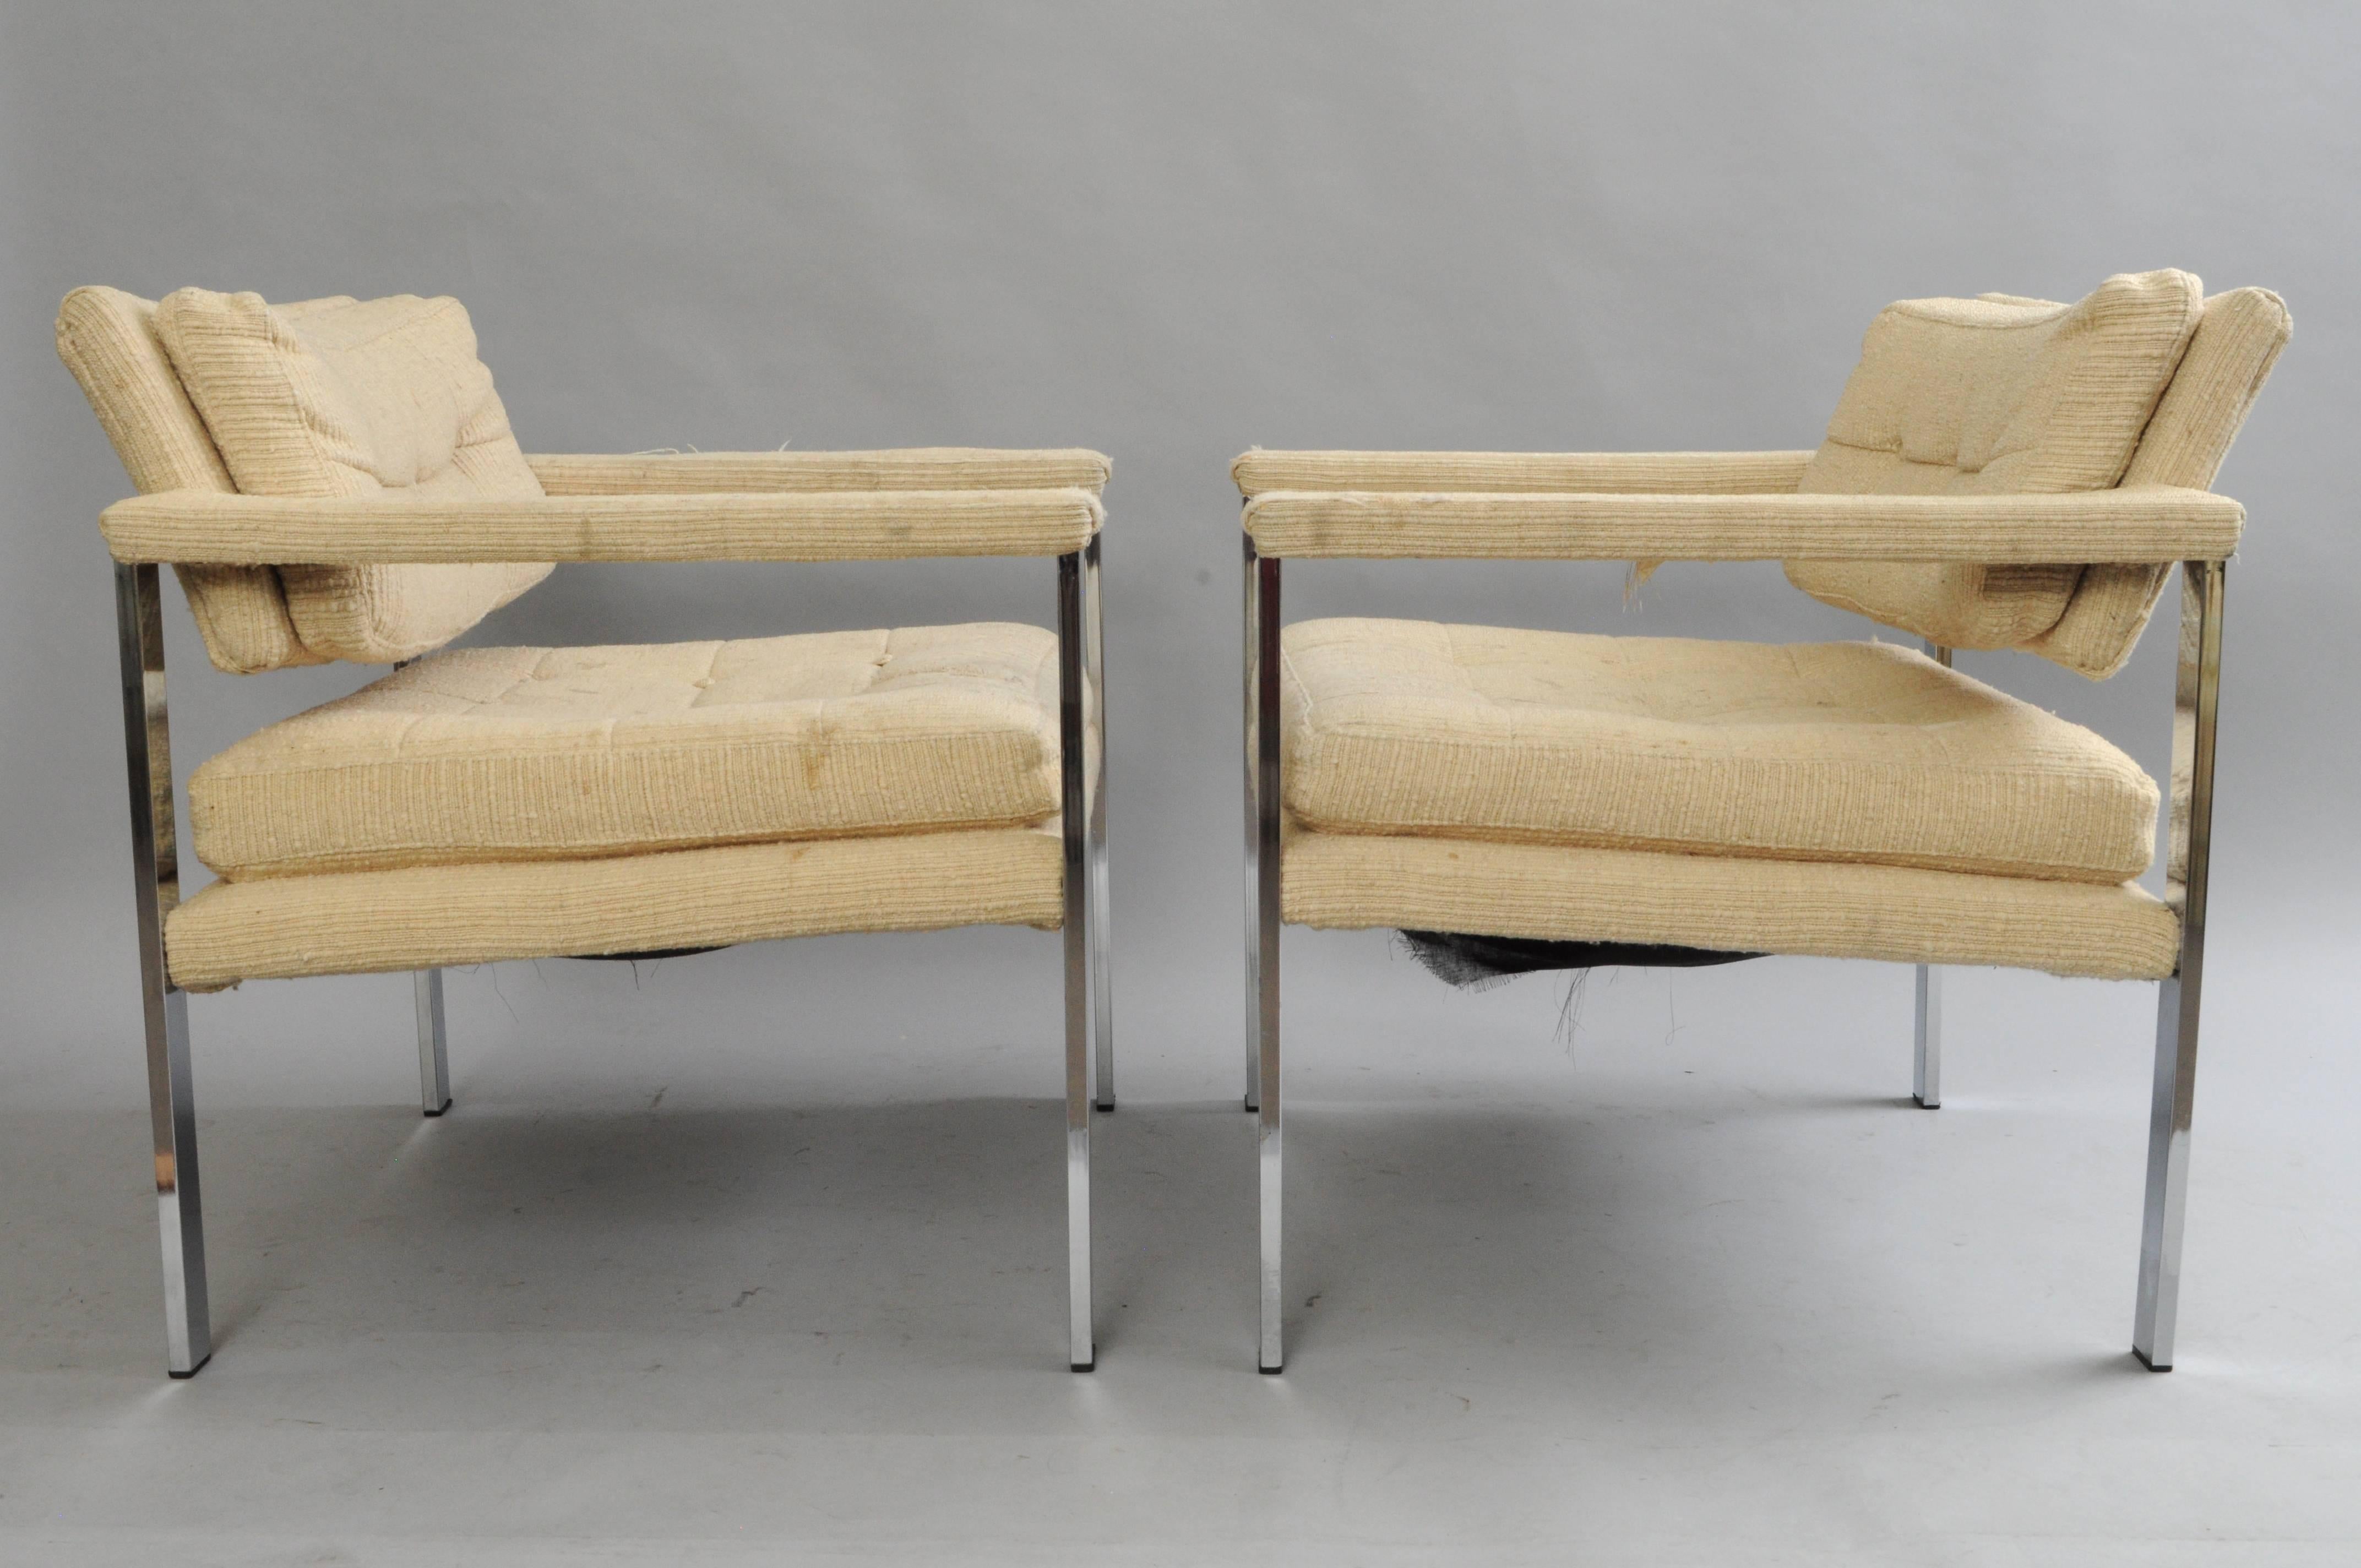 Pair of vintage Mid-Century Modern chrome flat bar arm chairs after Milo Baughman. The pair features sleek chrome frames, upholstered backs, seats and armrests, clean Modernist lines.